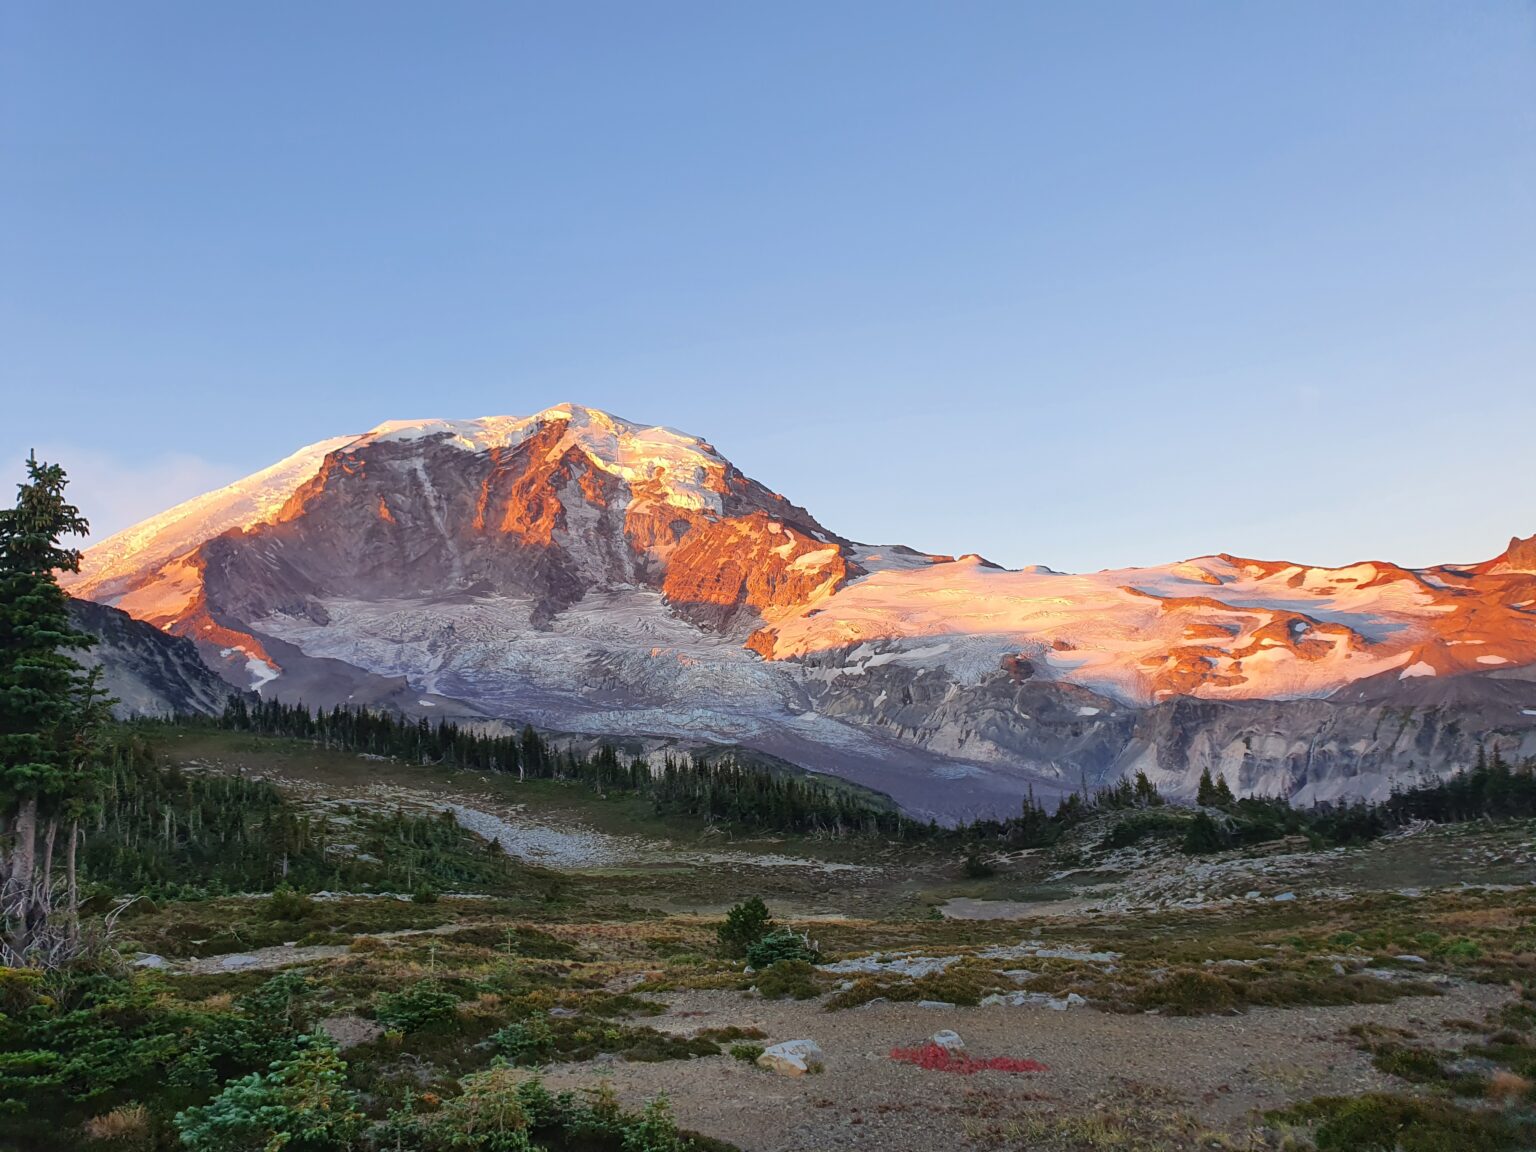 Waking up to the perfect sunrise over Mount Rainier in Moraine Park